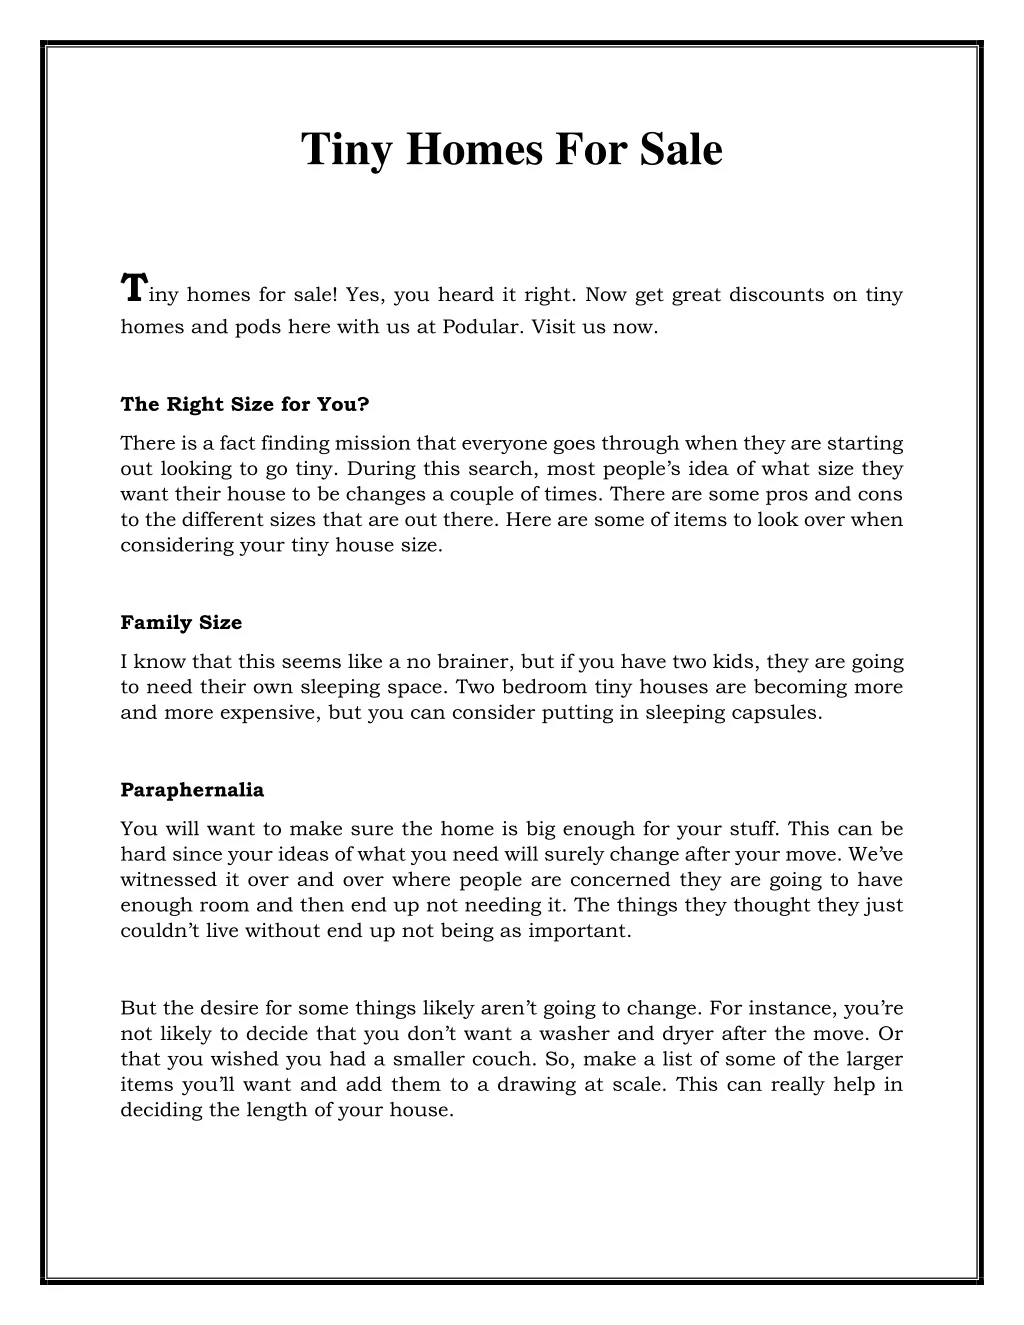 tiny homes for sale t iny homes for sale